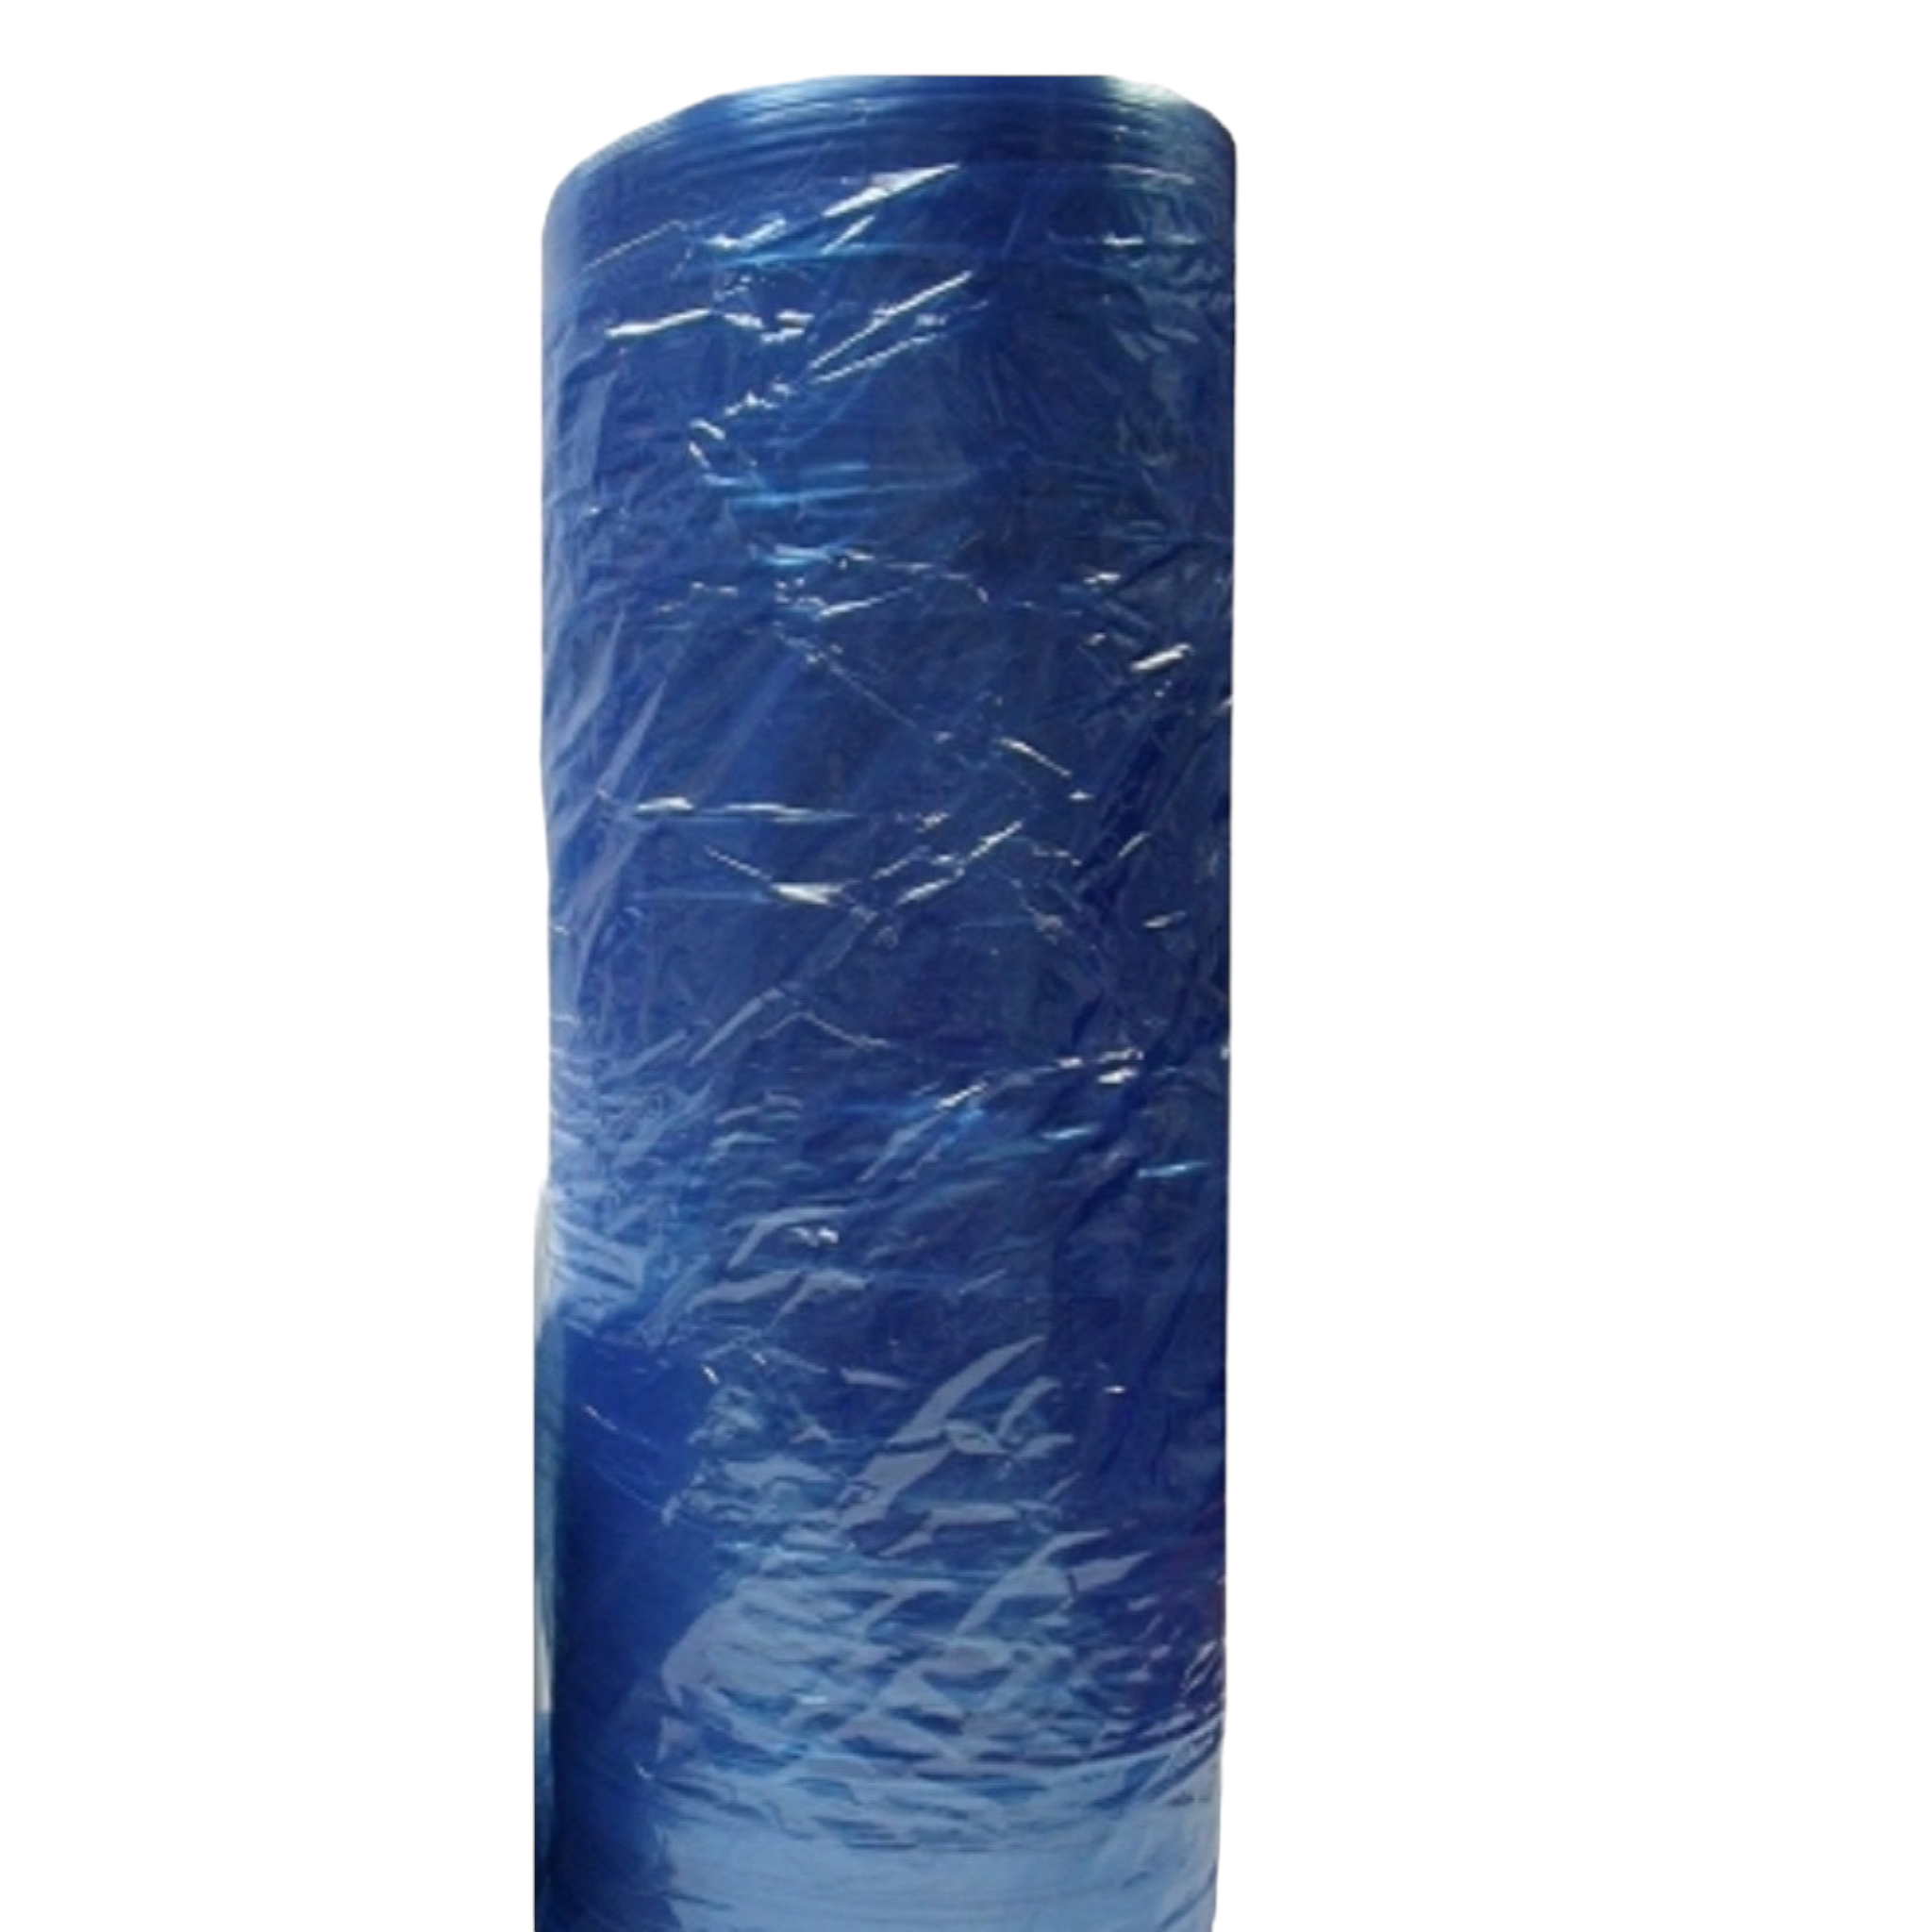 Plastic Dry Cleaning Roll Tubing Blue Tint 10kg per Roll